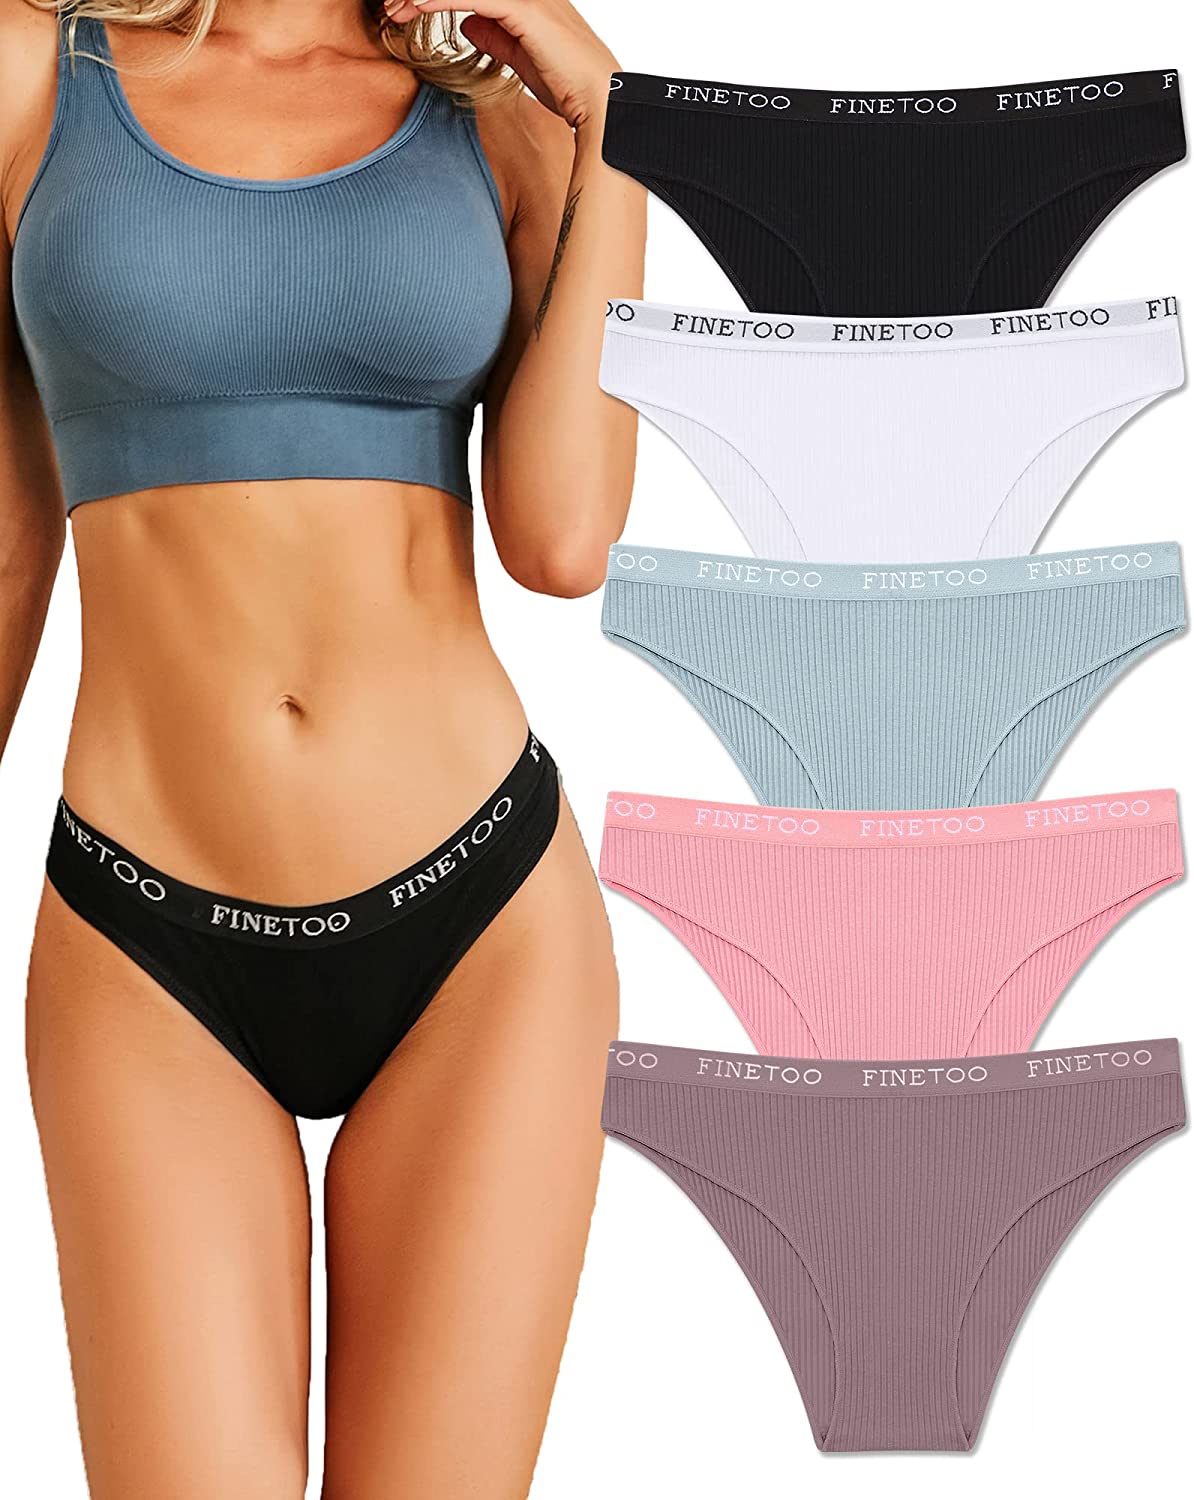 FINETOO Cotton Underwear for Women Cheeky High Cut Breathable Sexy